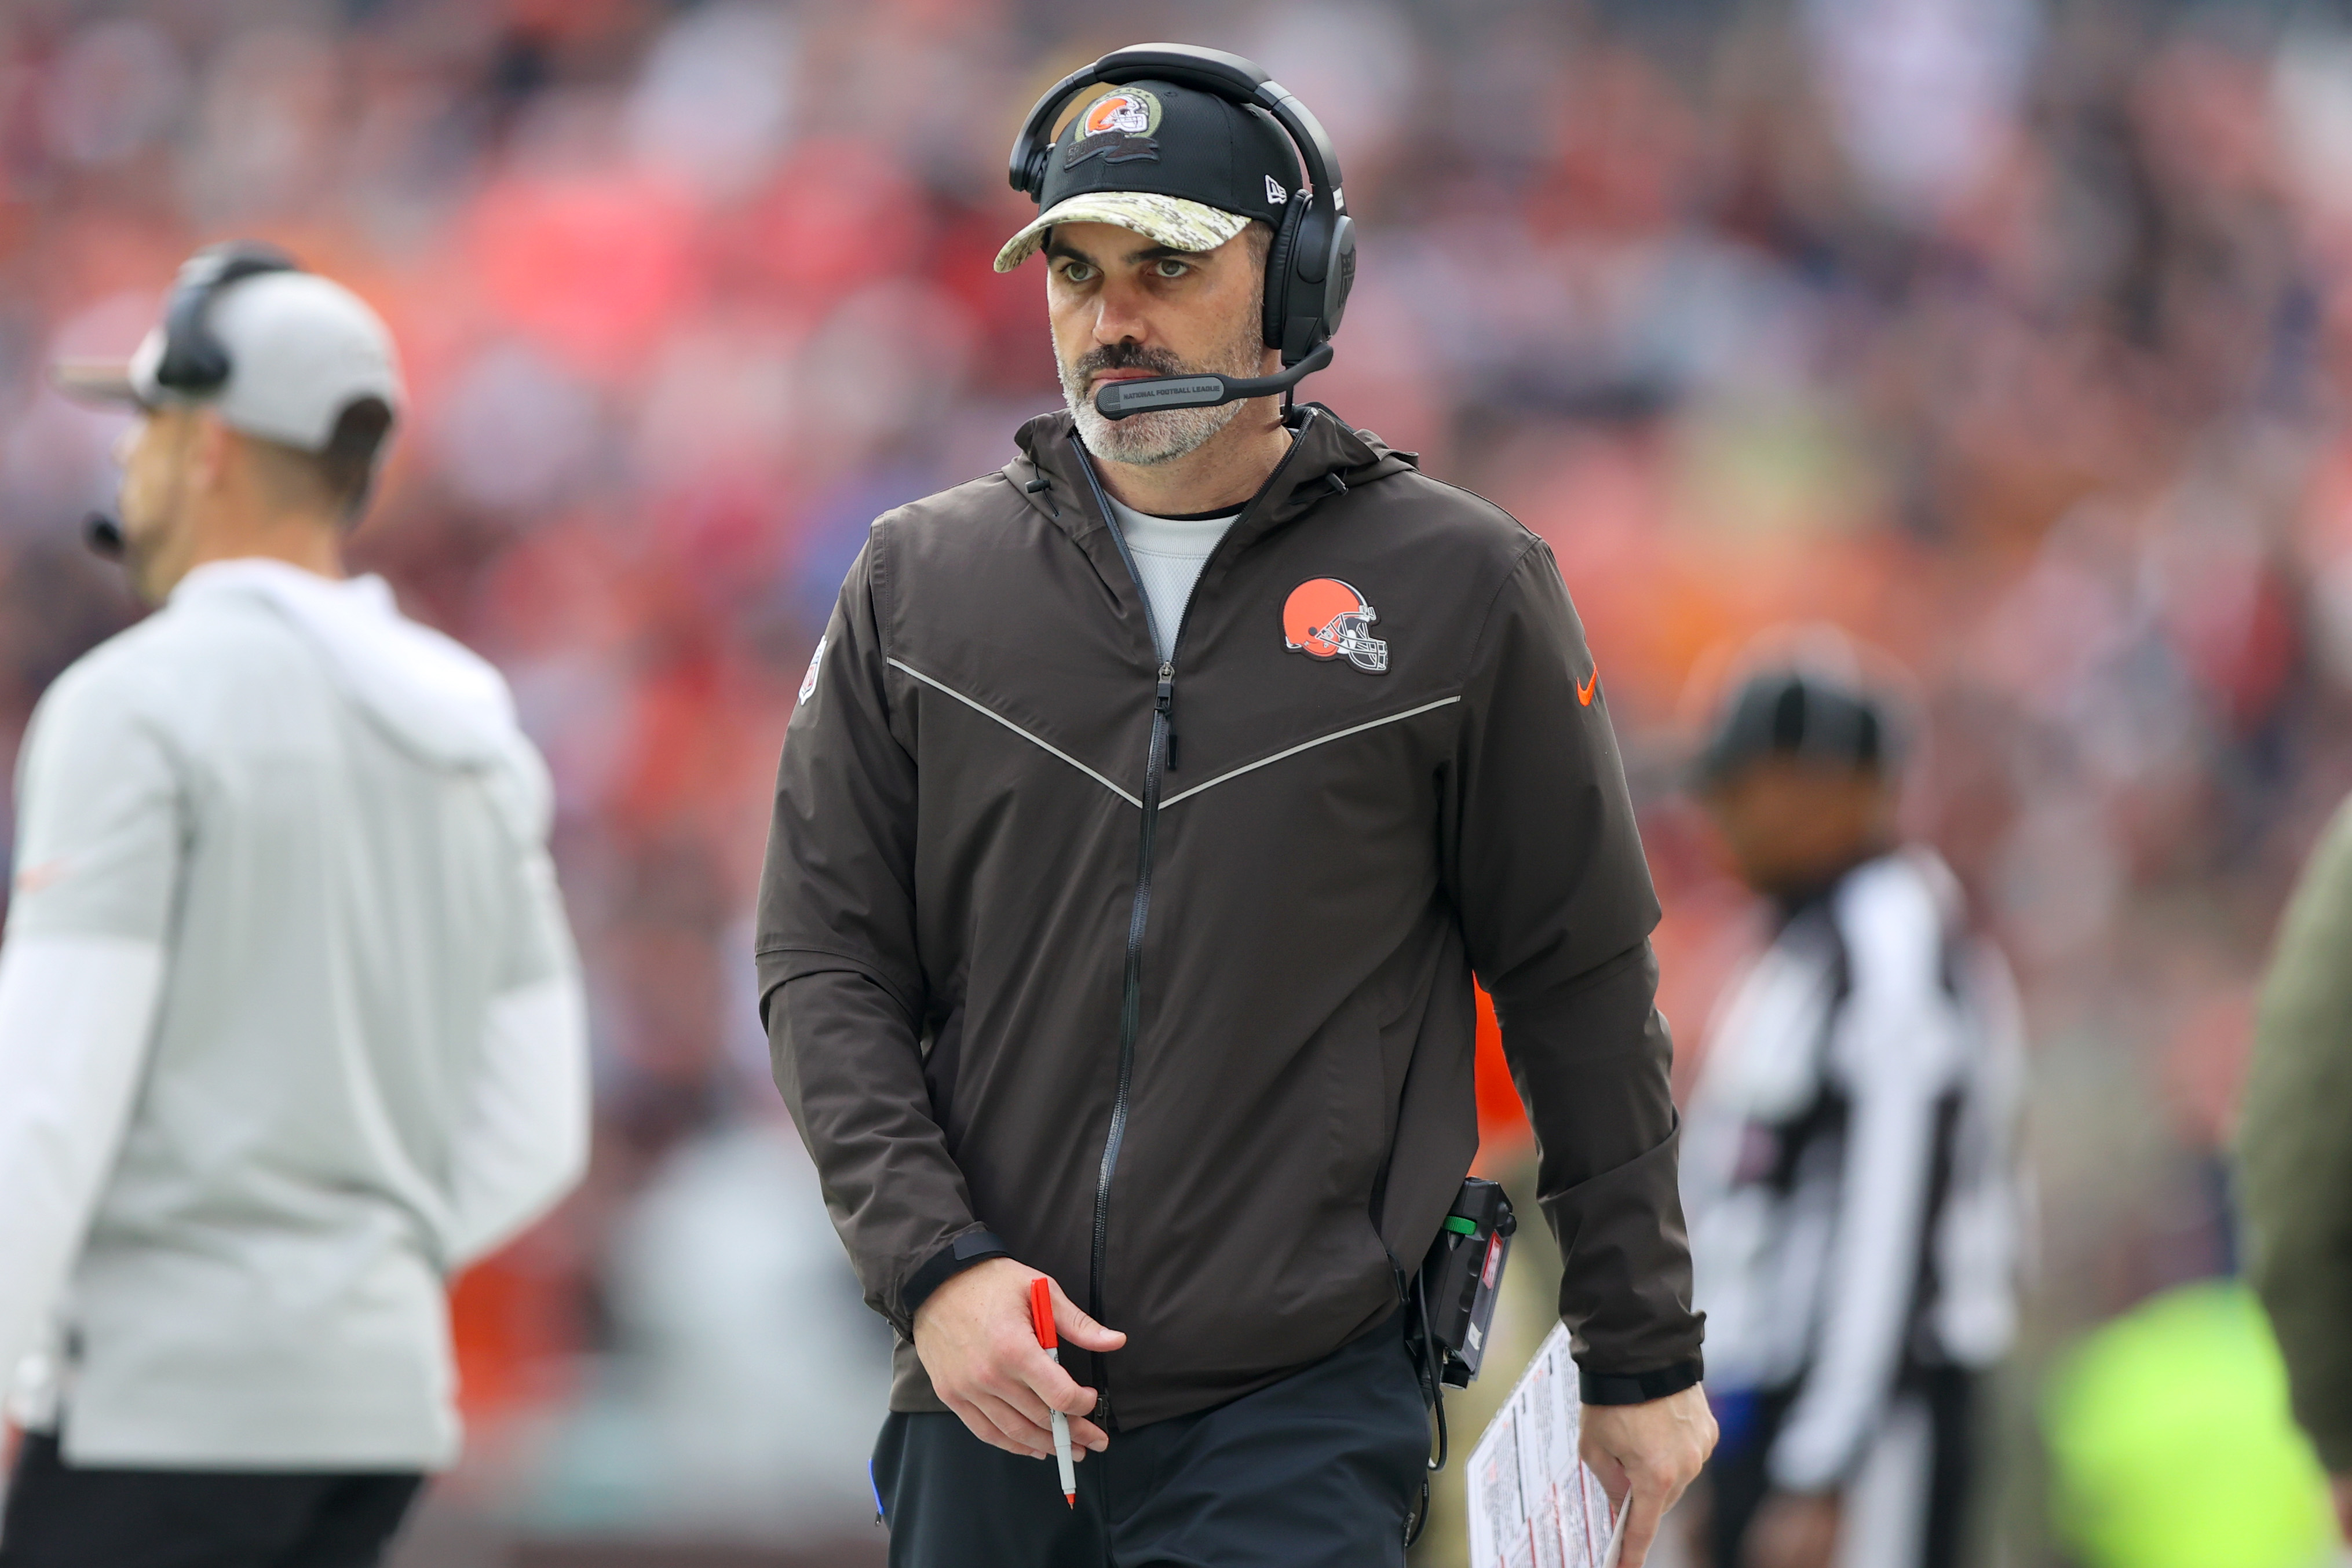 Cleveland Browns head coach Kevin Stefanski on the sideline during the third quarter of the National Football League game between the Tampa Bay Buccaneers and Cleveland Browns on November 27, 2022, at FirstEnergy Stadium in Cleveland, OH.